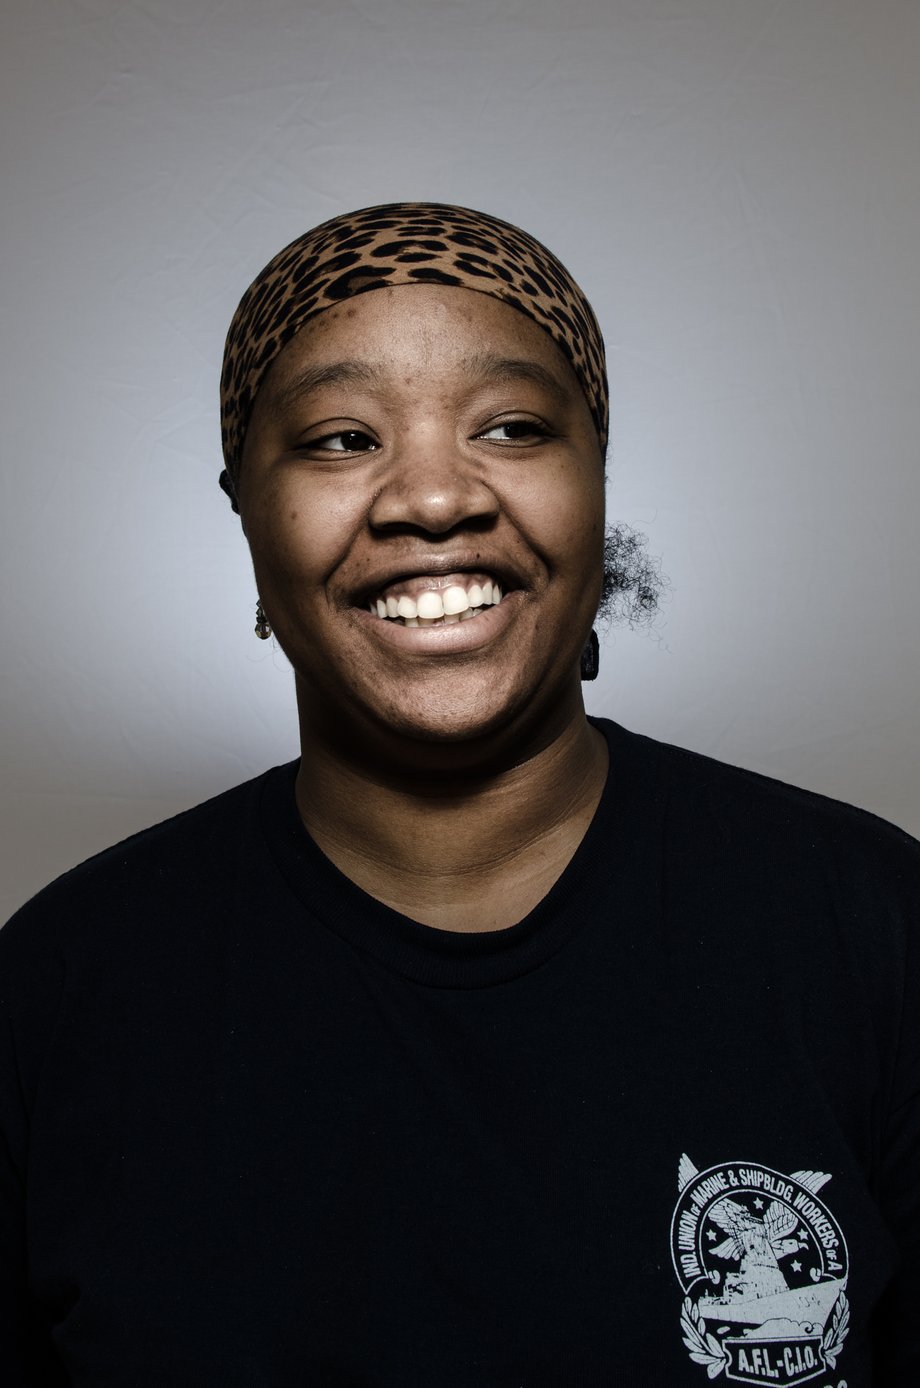 Heather Perry's portrait of Amanda, smiling, in a black t-shirt and leopard print head wrap